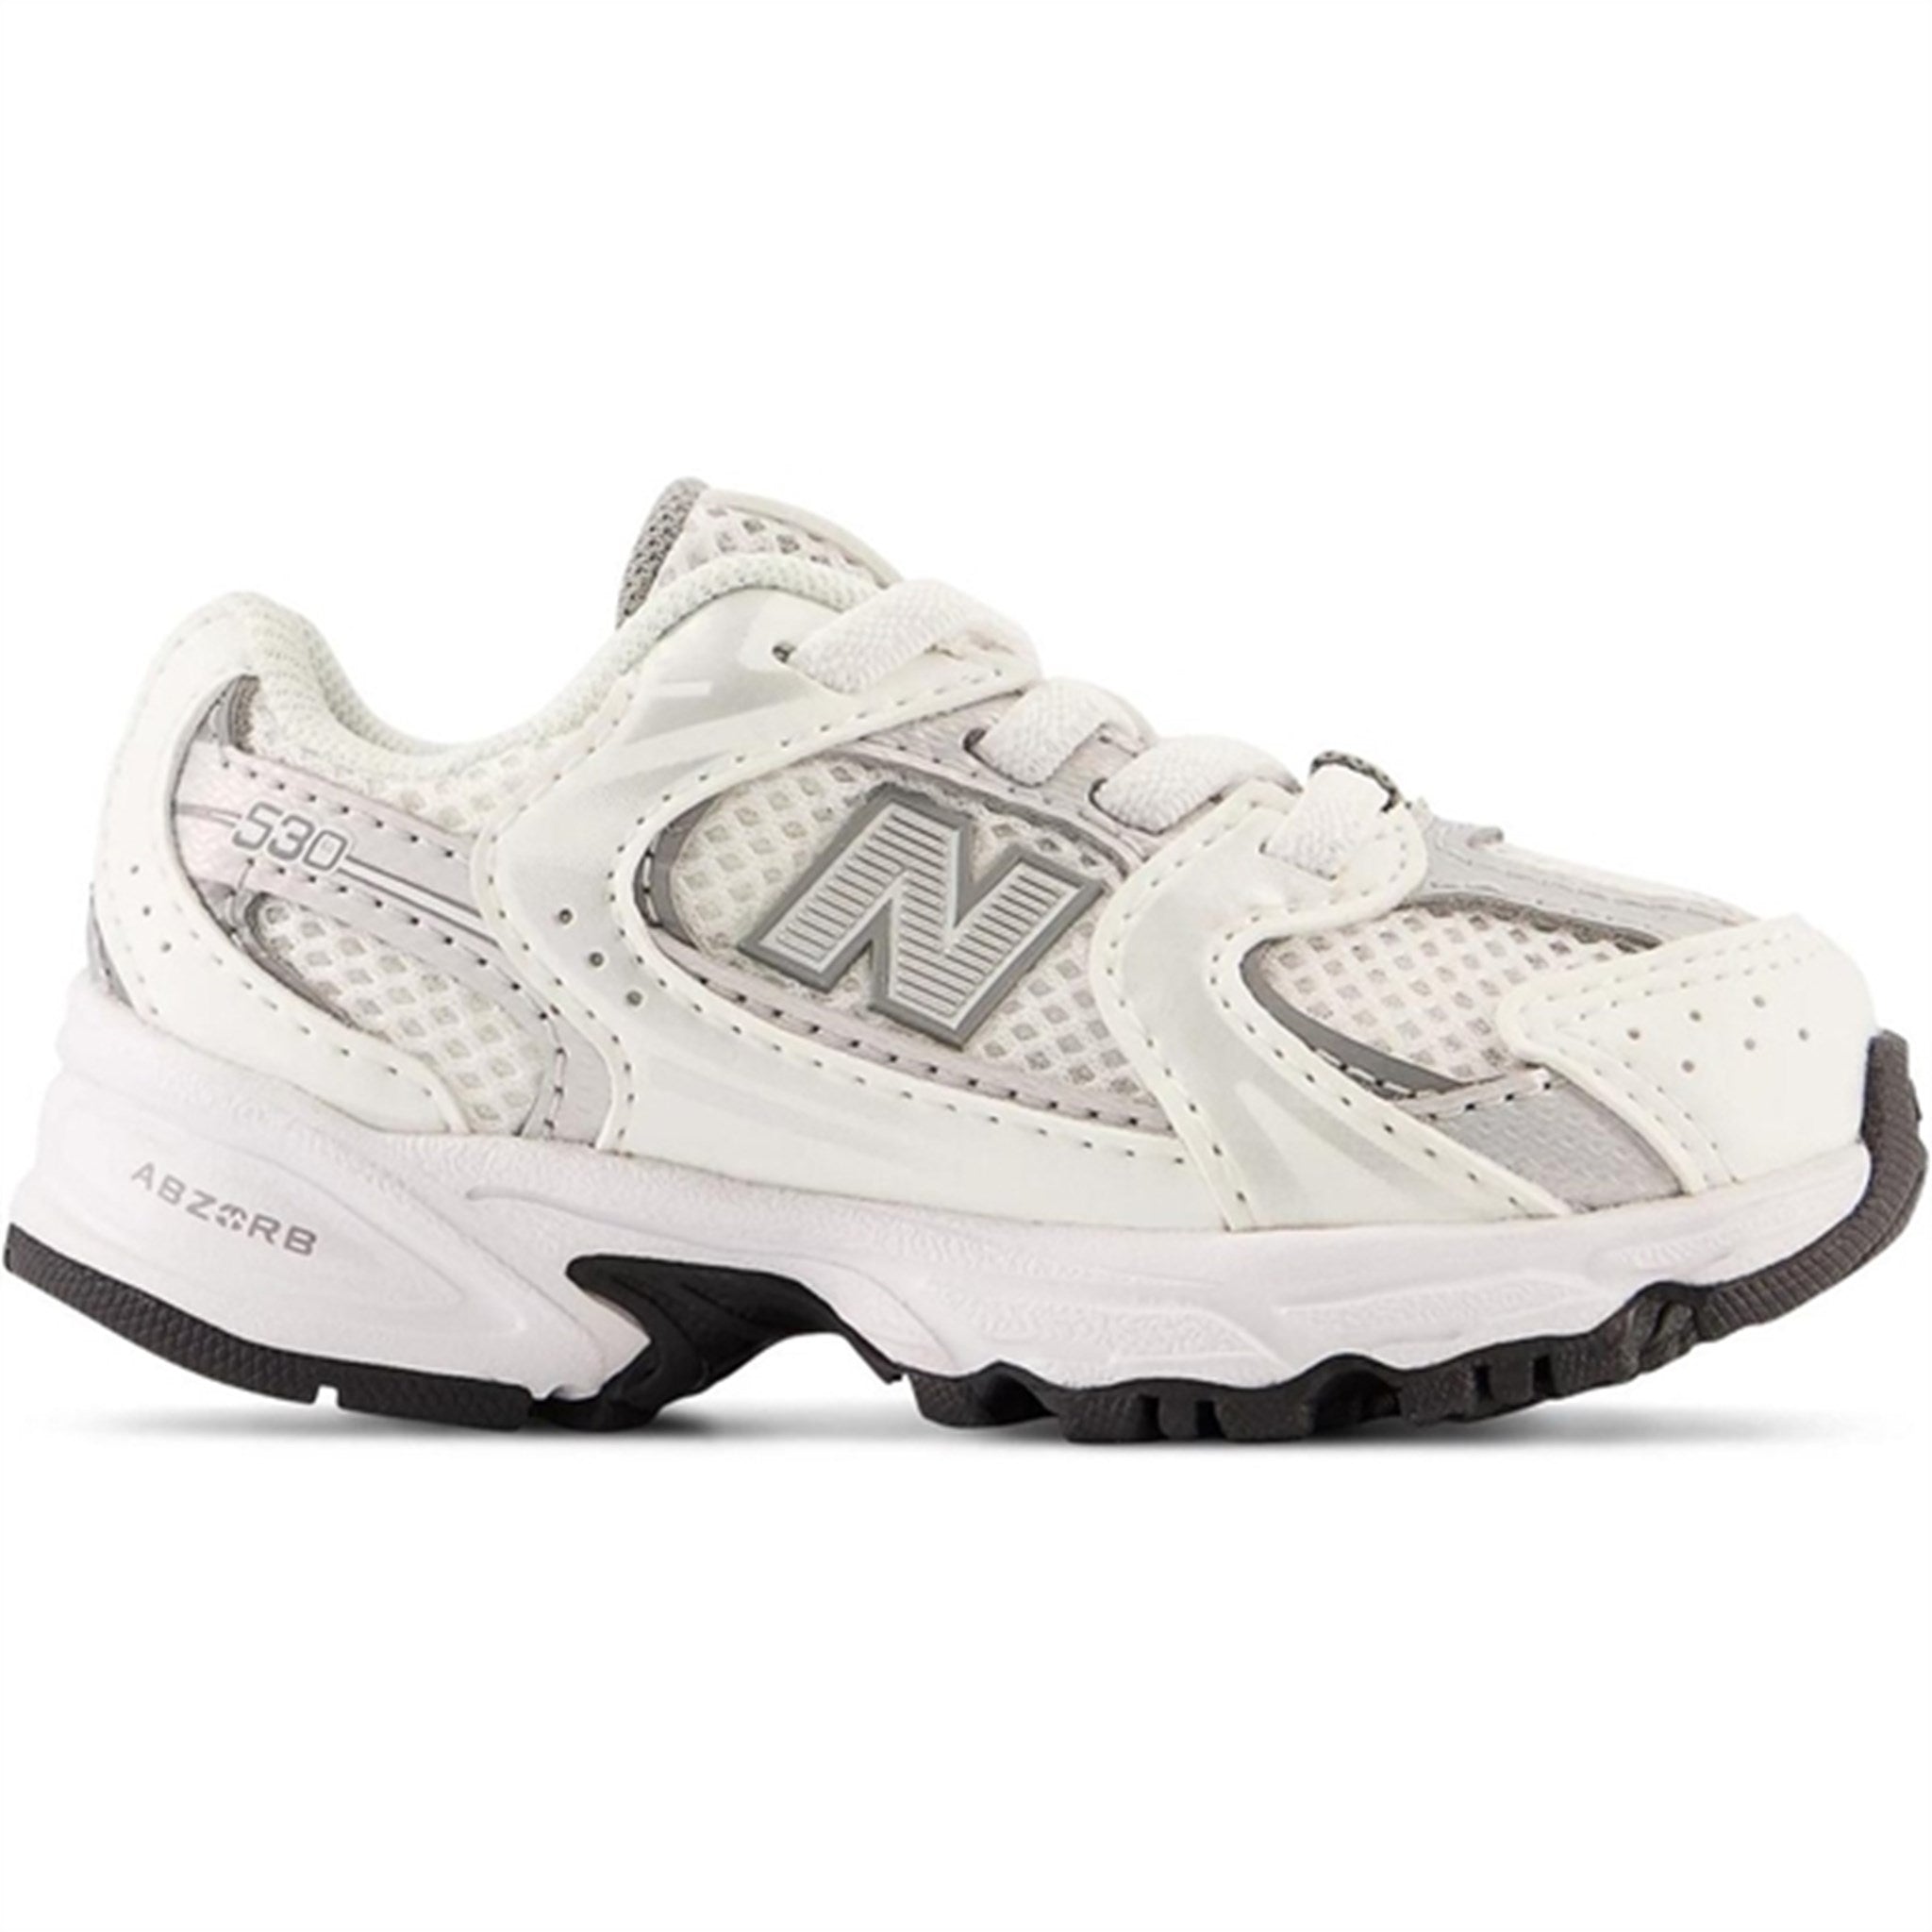 New Balance 530 Kids Bungee Lace Infant White